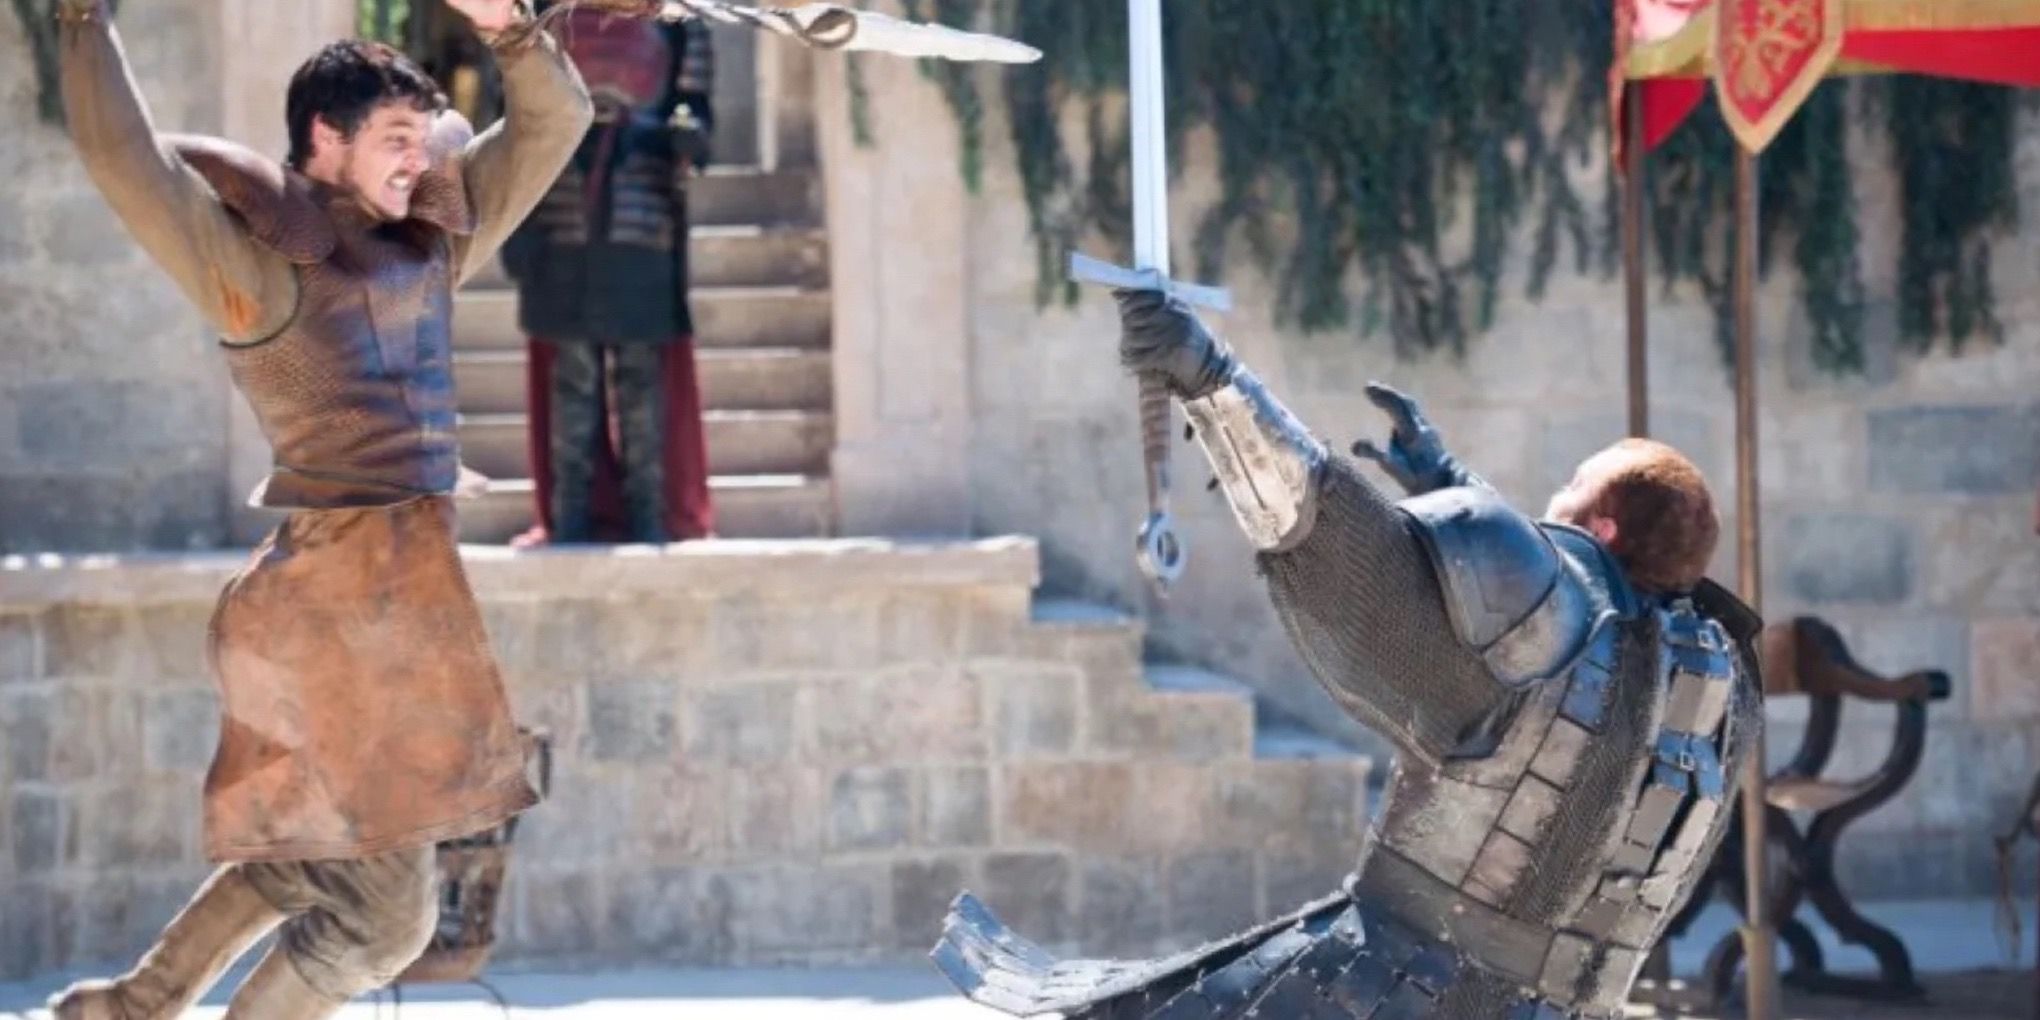 A still from the Game of Thrones episode The Mountain and The Viper (S4E8)